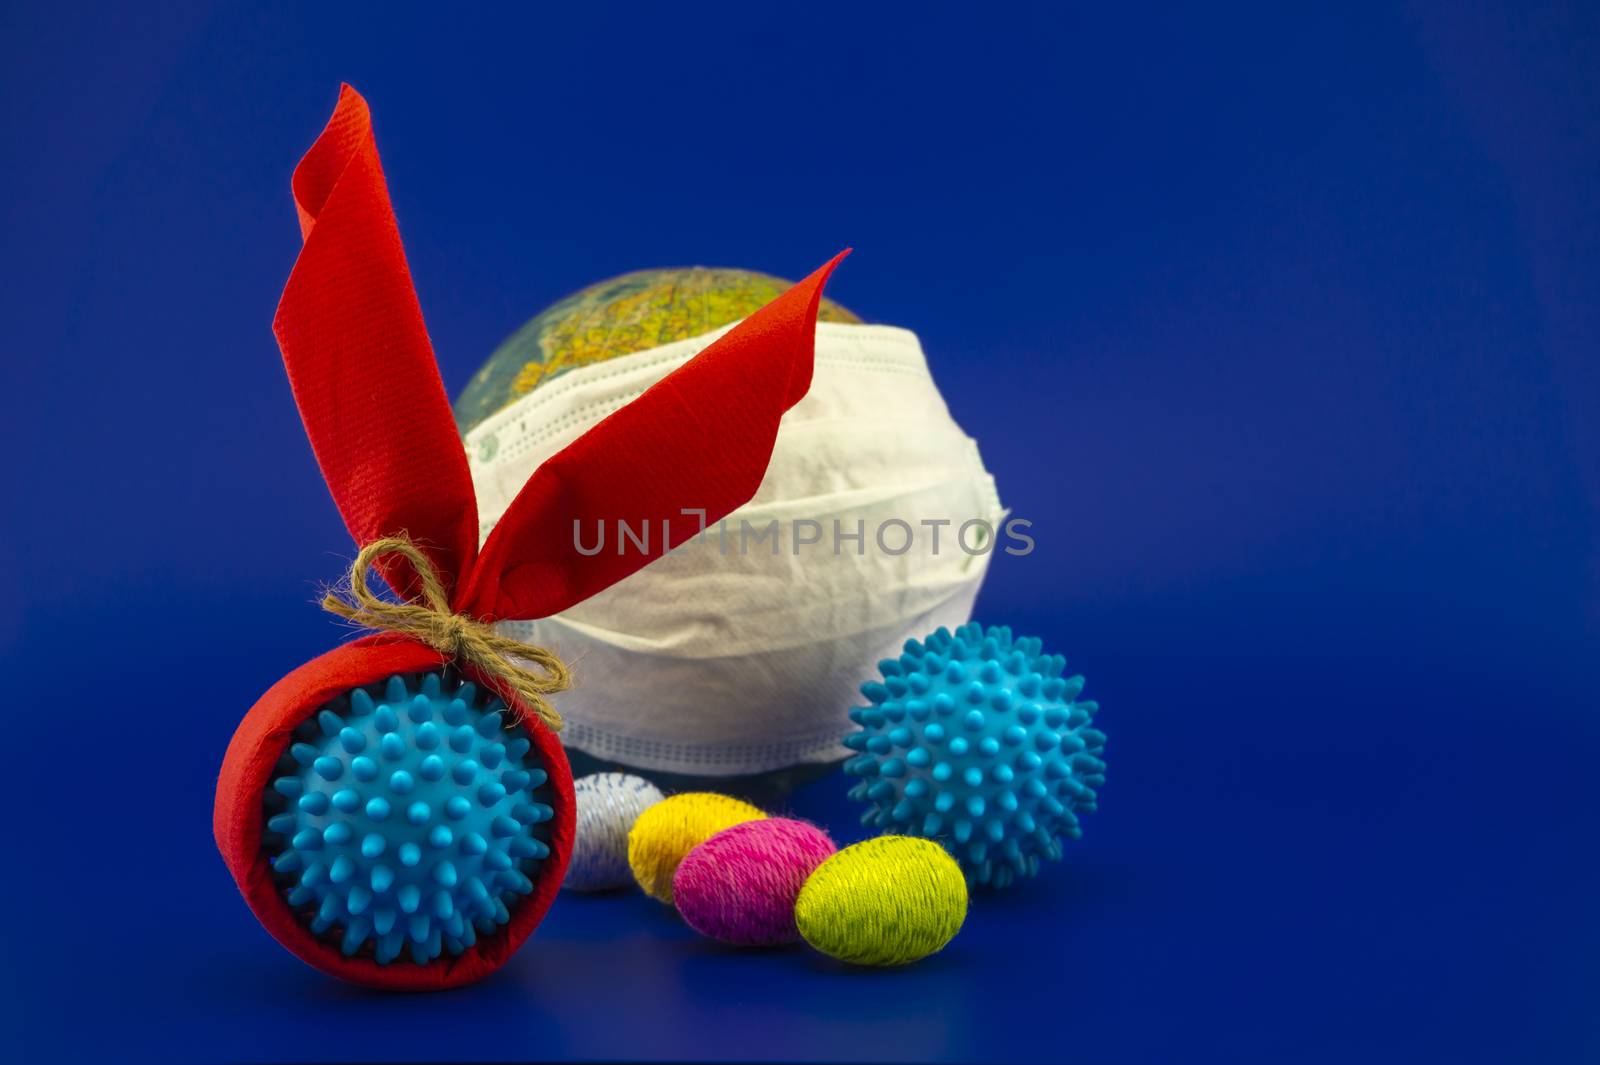 Easter eggs and virus models wrapped as gifts by NetPix